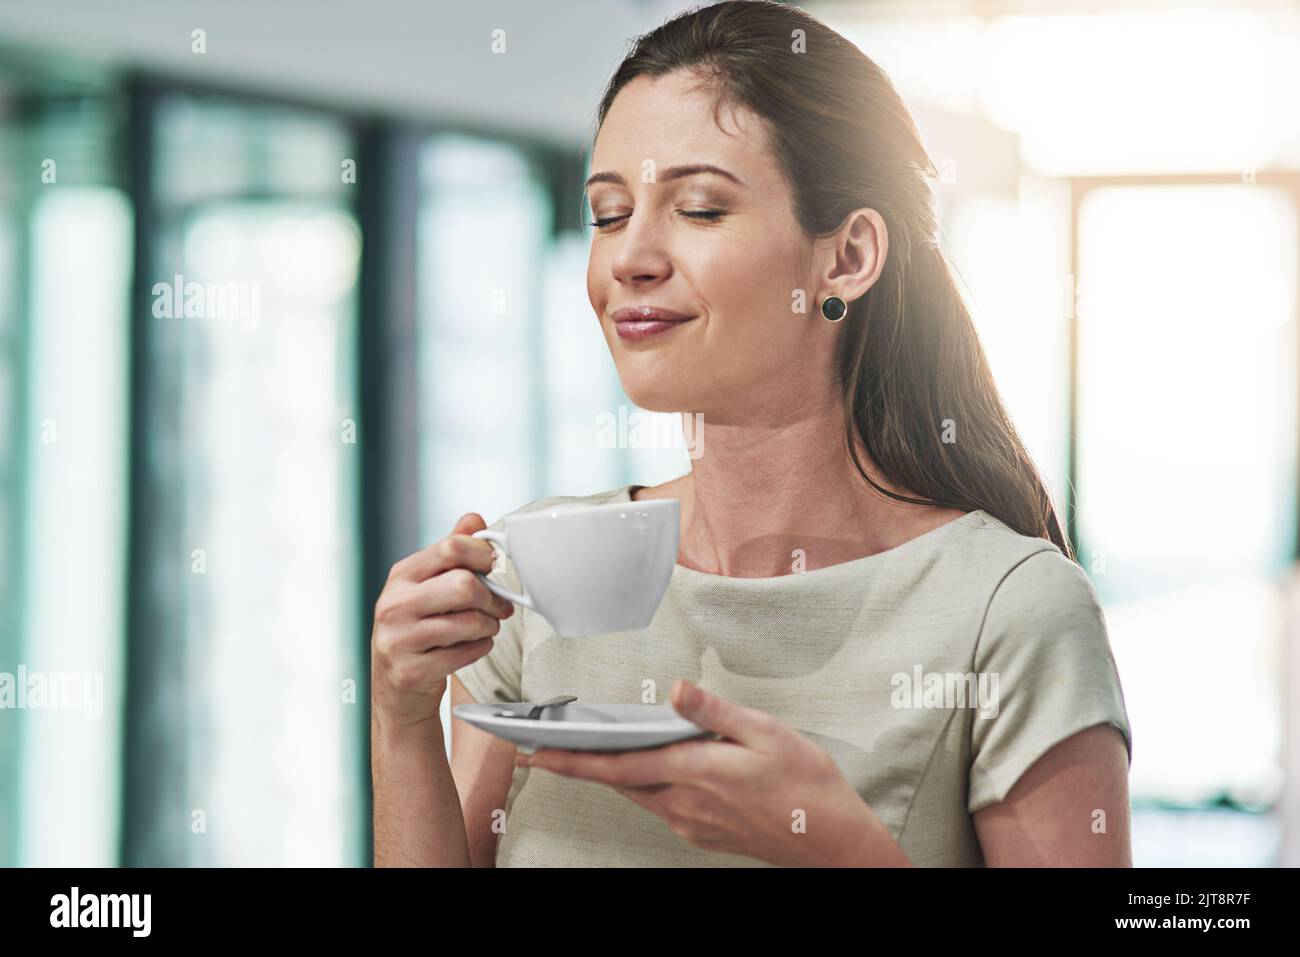 Nothing like a good cuppa to boost your mood. a young businesswoman enjoying a cup of coffee in an office. Stock Photo